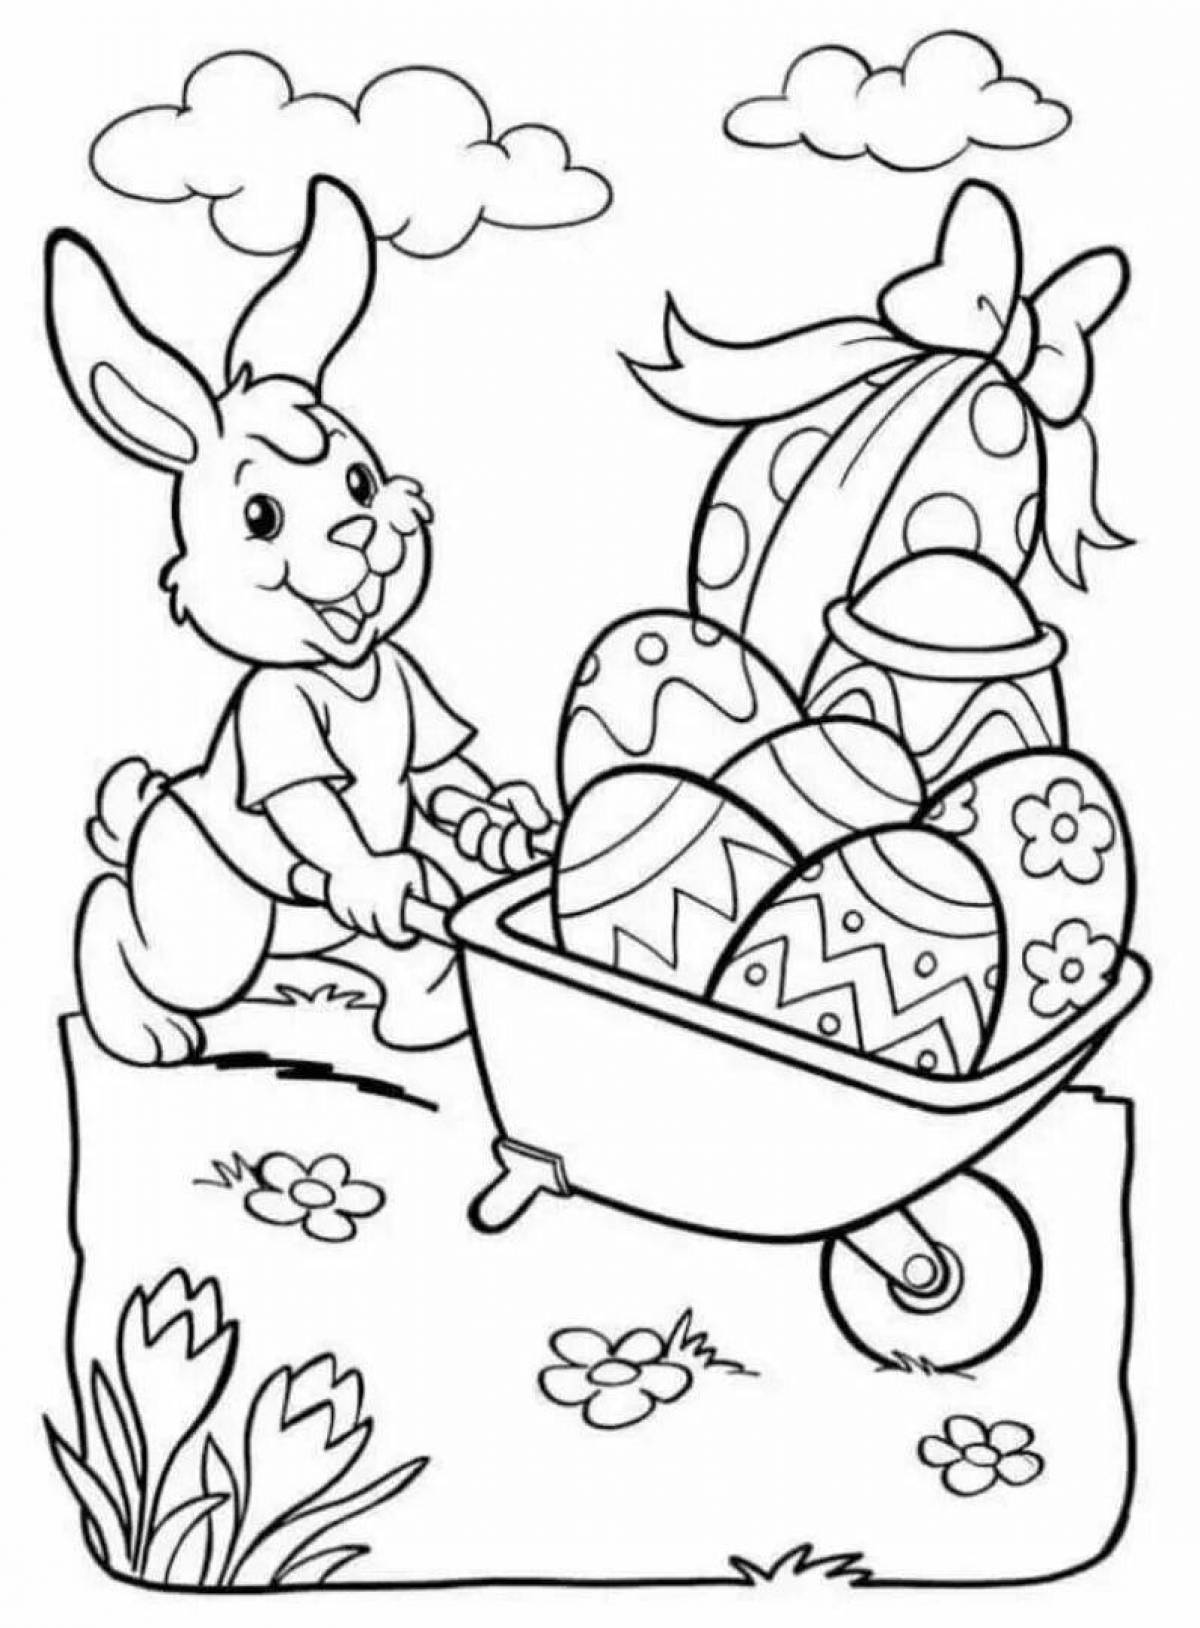 Fun Easter coloring for kids